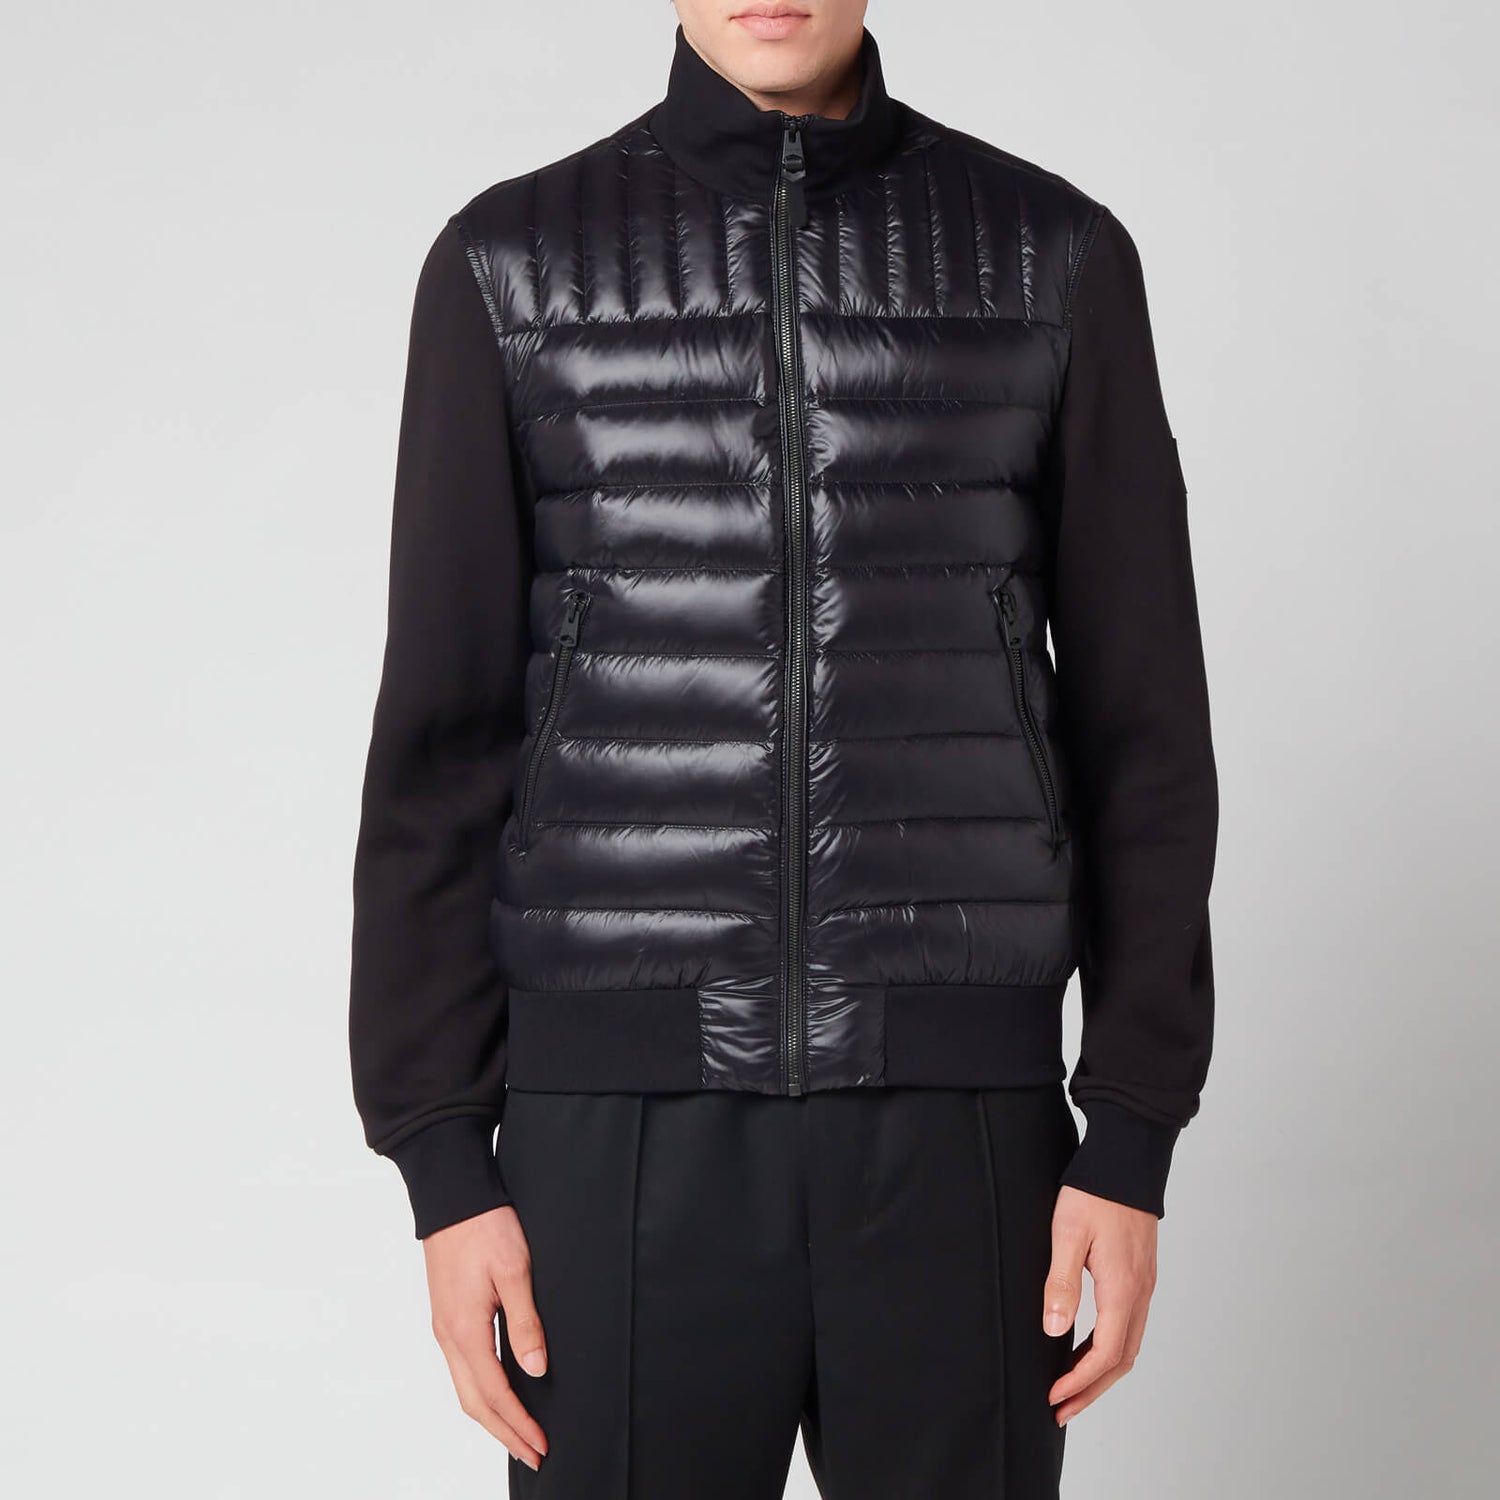 Mackage Men's Collin Bomber Jacket with Quilted Down Front Body - Black - XS